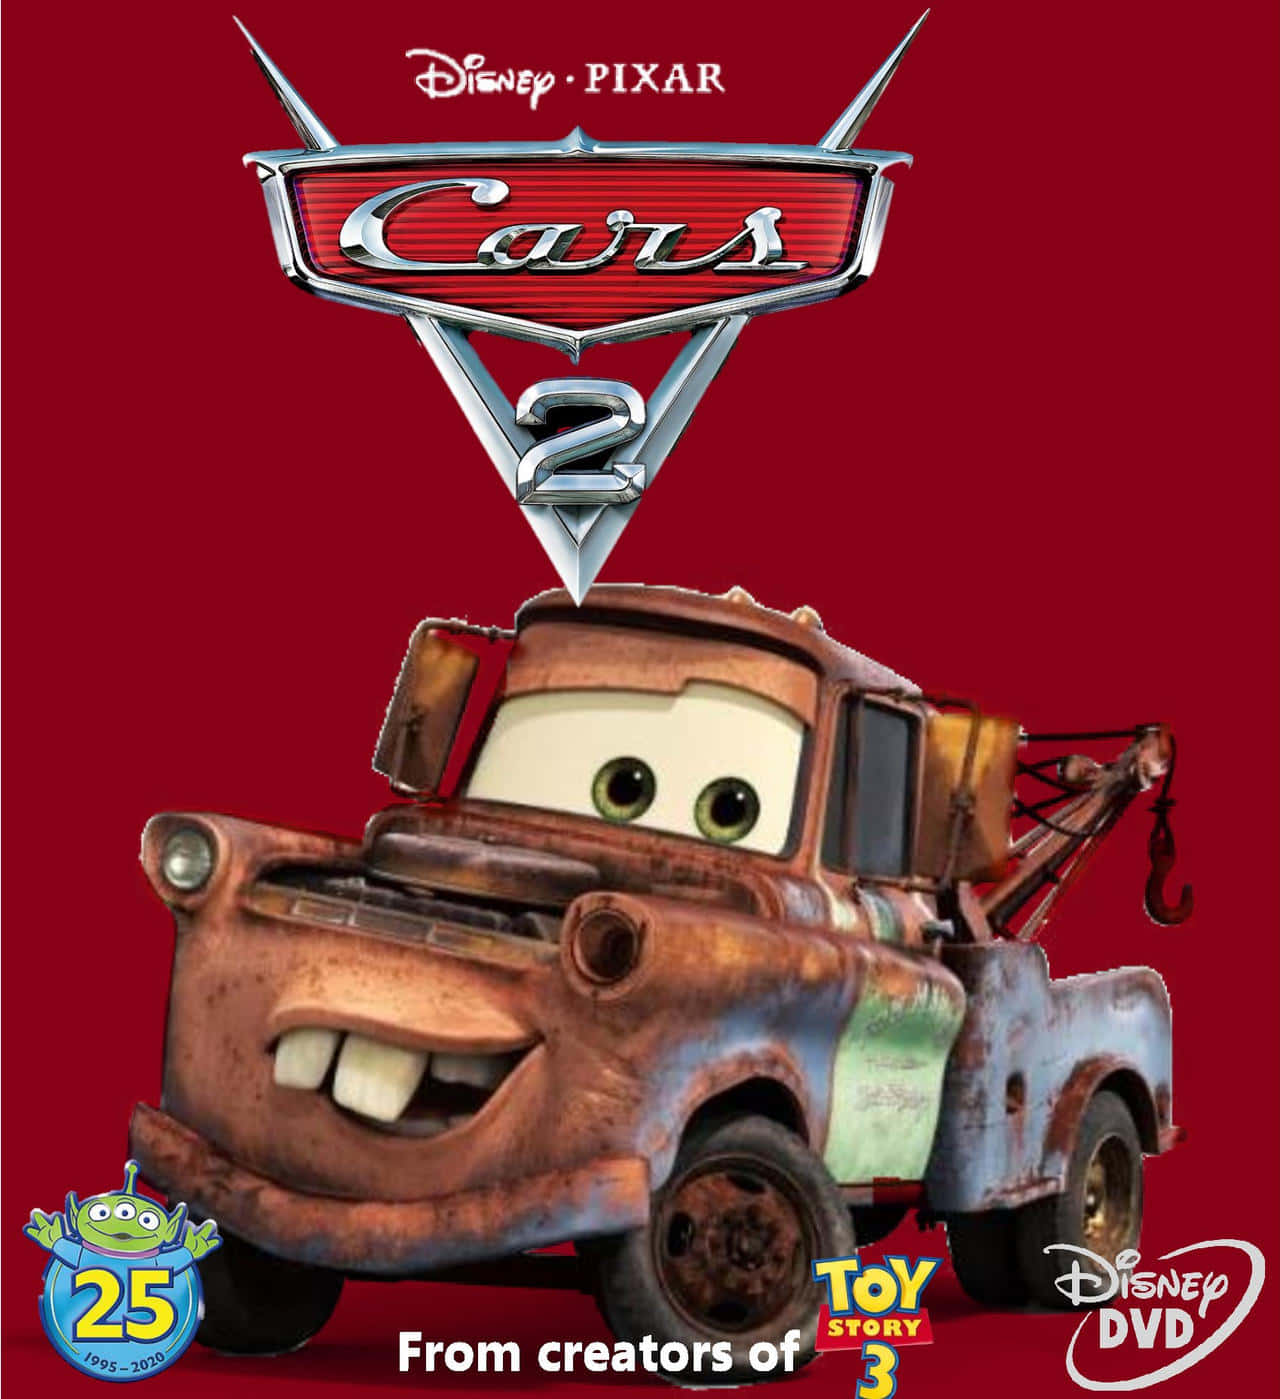 Sibling rivals Lightning McQueen and Mater join forces.